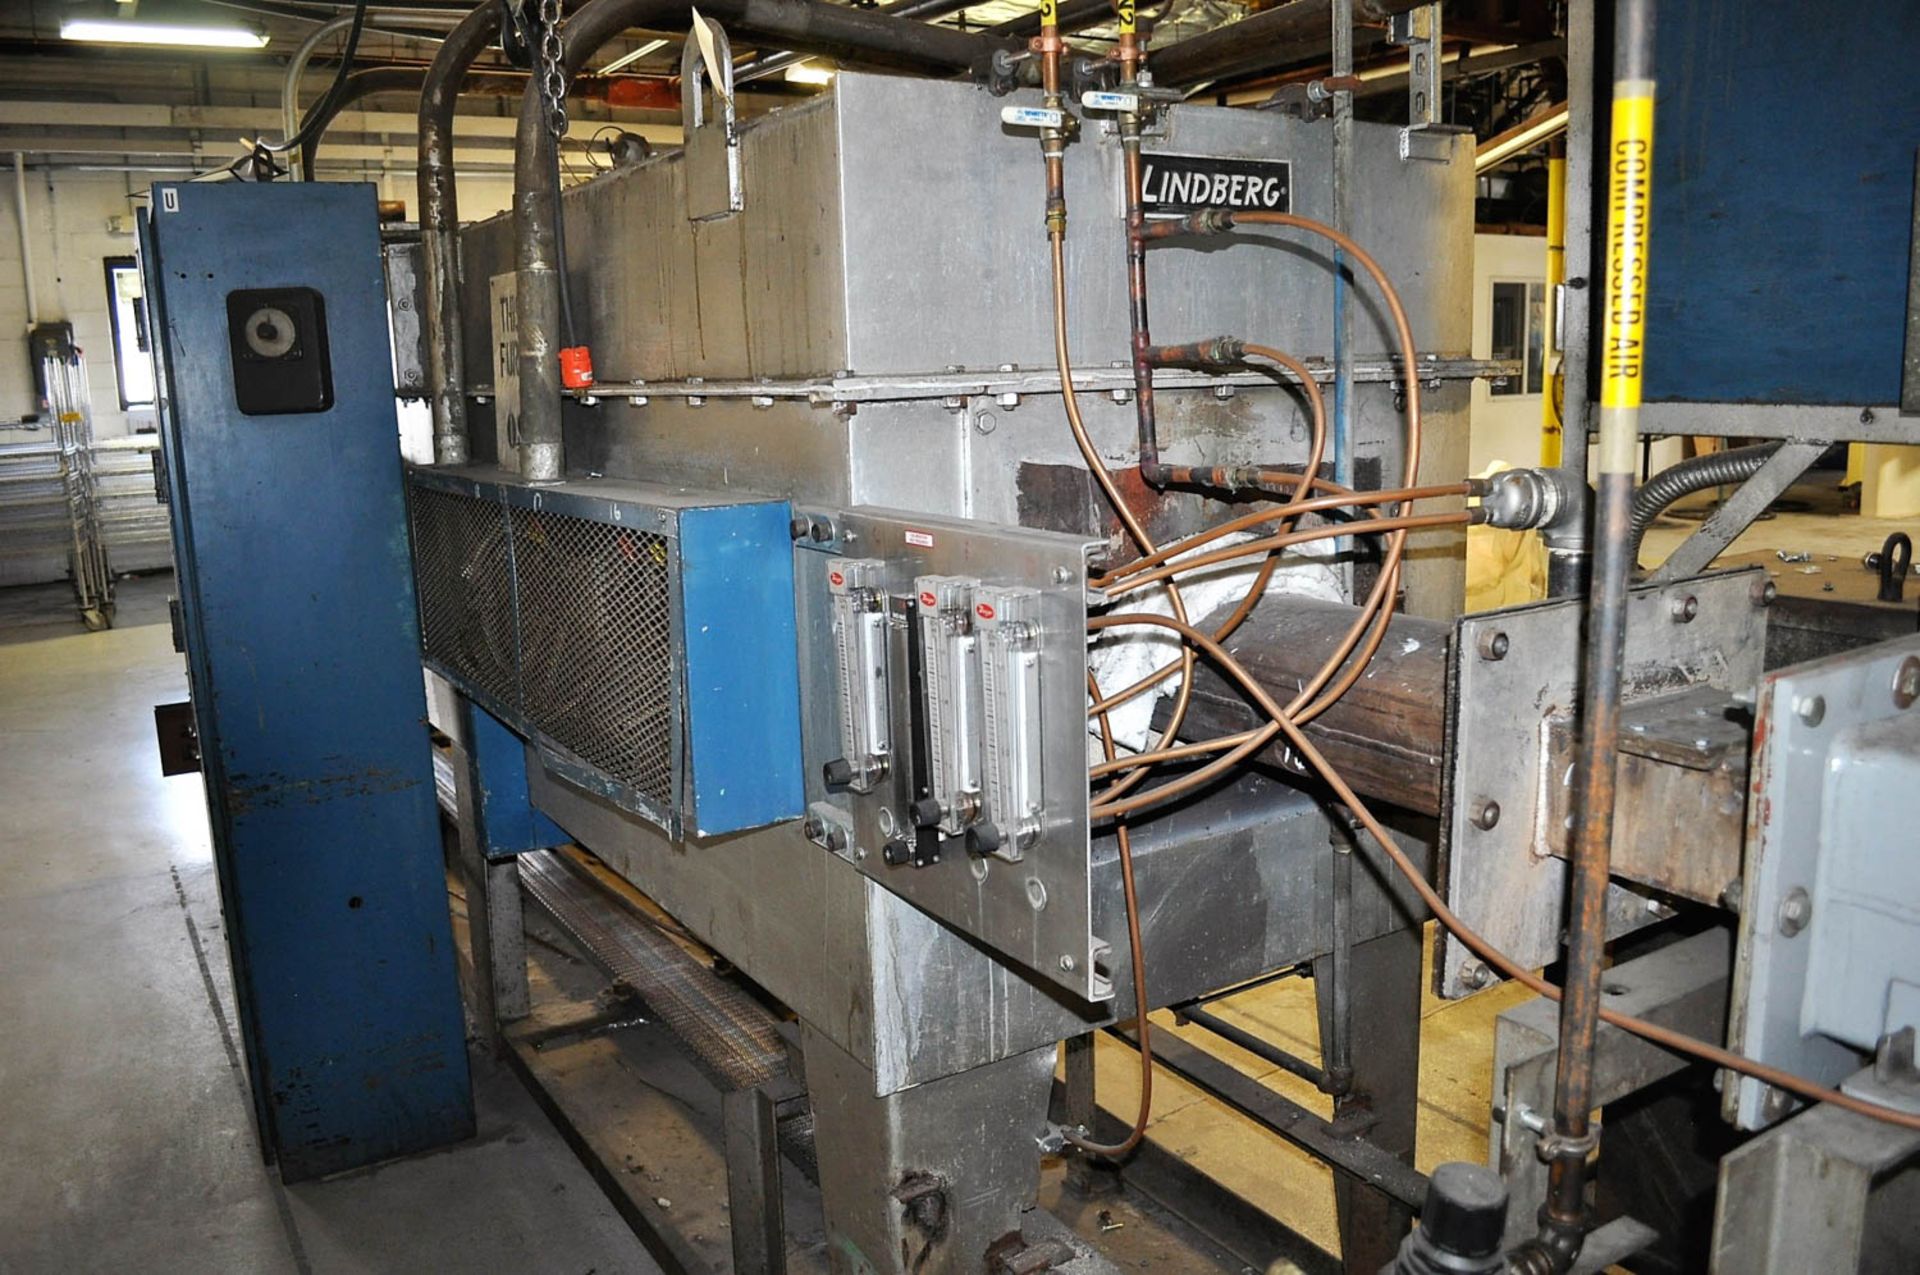 7" LINDBERG PASS THRU BELT FURNACE, 3-ZONE, WITH DIGITAL TEMPERATURE CONTROLS, S/N: N/A - Image 4 of 9